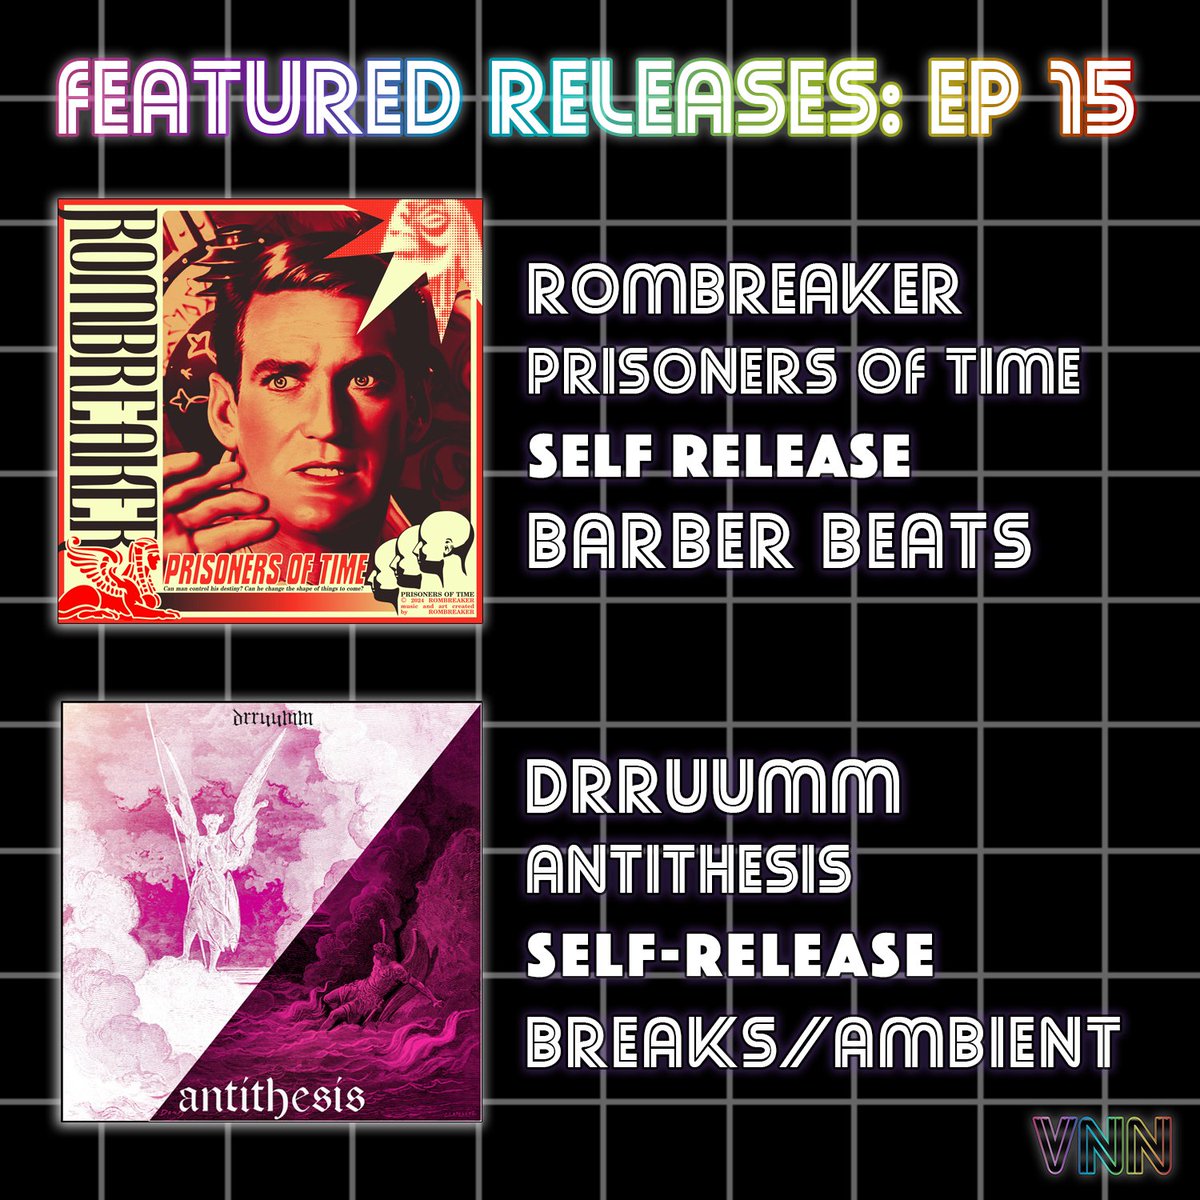 Forgot to post this here on Twitter.. Our most recent episode featured TWO reviews! ⭆ @ROMBREAKER - Prisoners of Time Barber Beats, Lounge, Vaporbreaks ⭆ drruumm (@lovers_dream_) - antithesis breakcore, ambient, dreampunk Check out our most recent episode for full reviews!